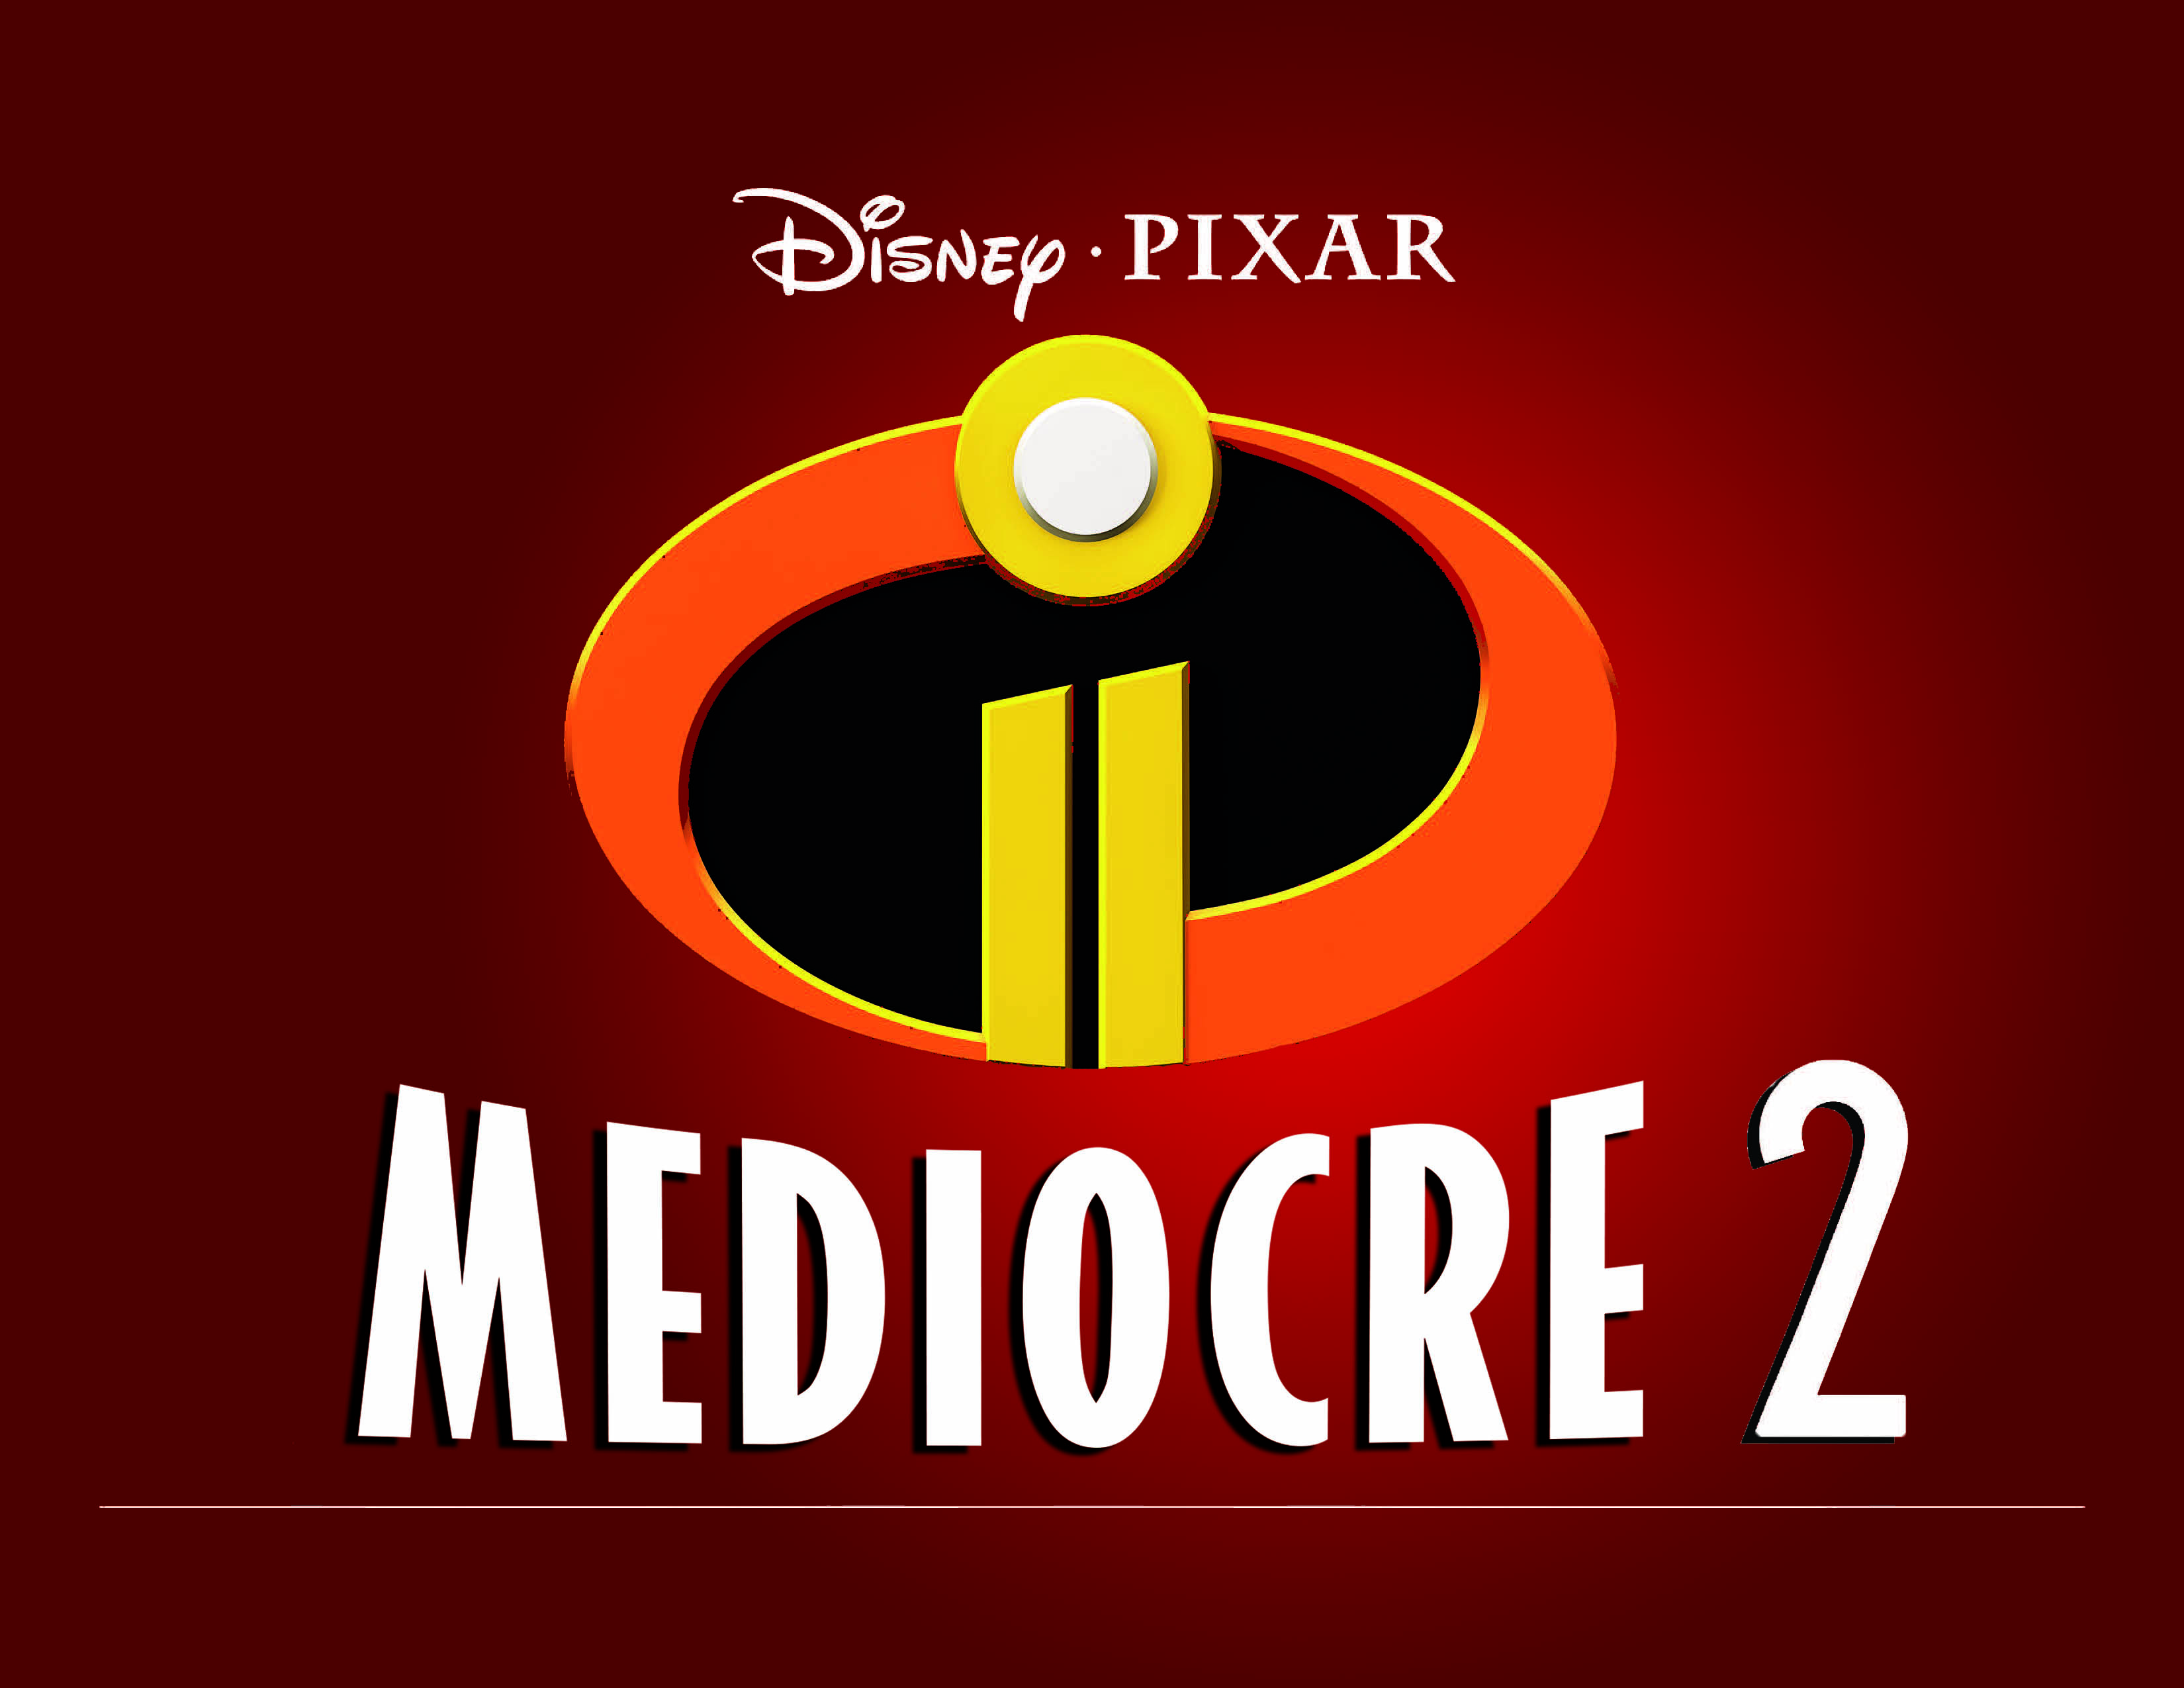 Incredible the Pixar Logo - Unspectaculars 2: A Review of “Incredibles 2” – The Index